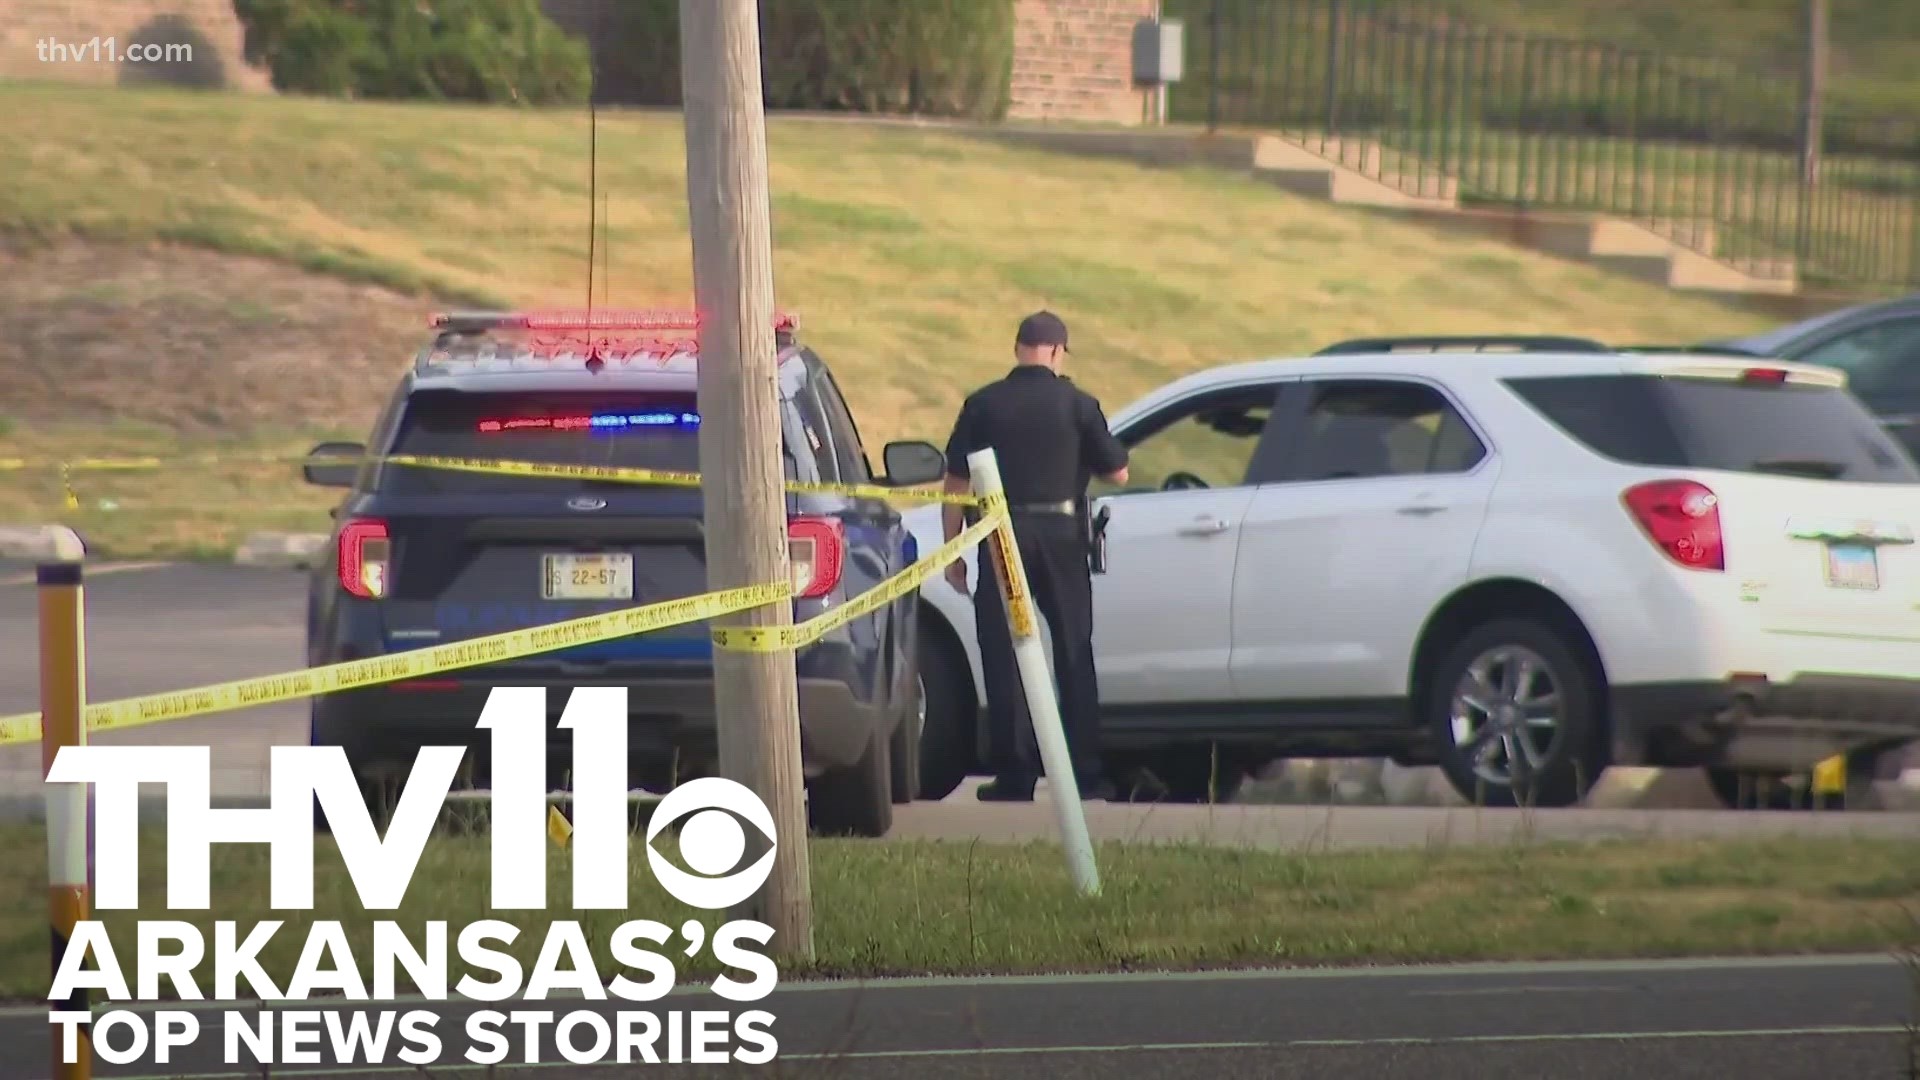 Ashley Godwin delivers Arkansas's top news stories for June 18, 2023, including the latest on a shooting near Chicago where more than 20 people were shot at.